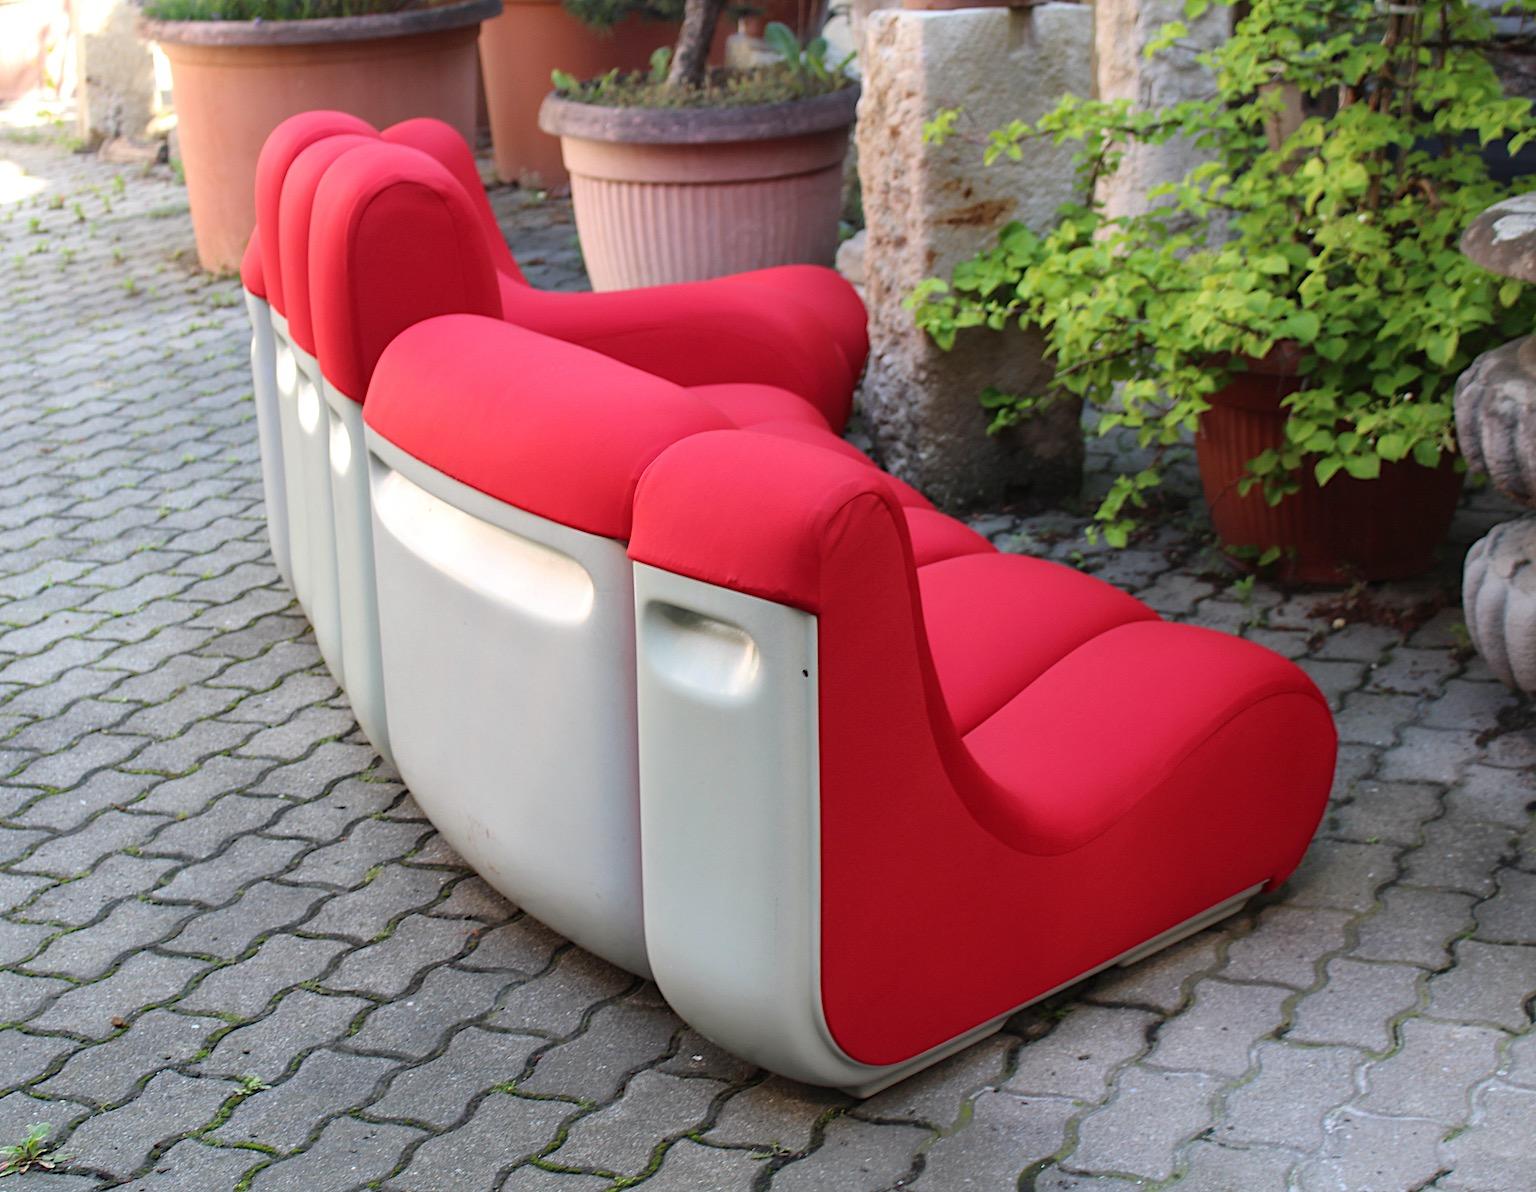 Space Age Vintage Red Sectional Freestanding Sofa Vario Pillo Burghardt Vogtherr For Sale 4